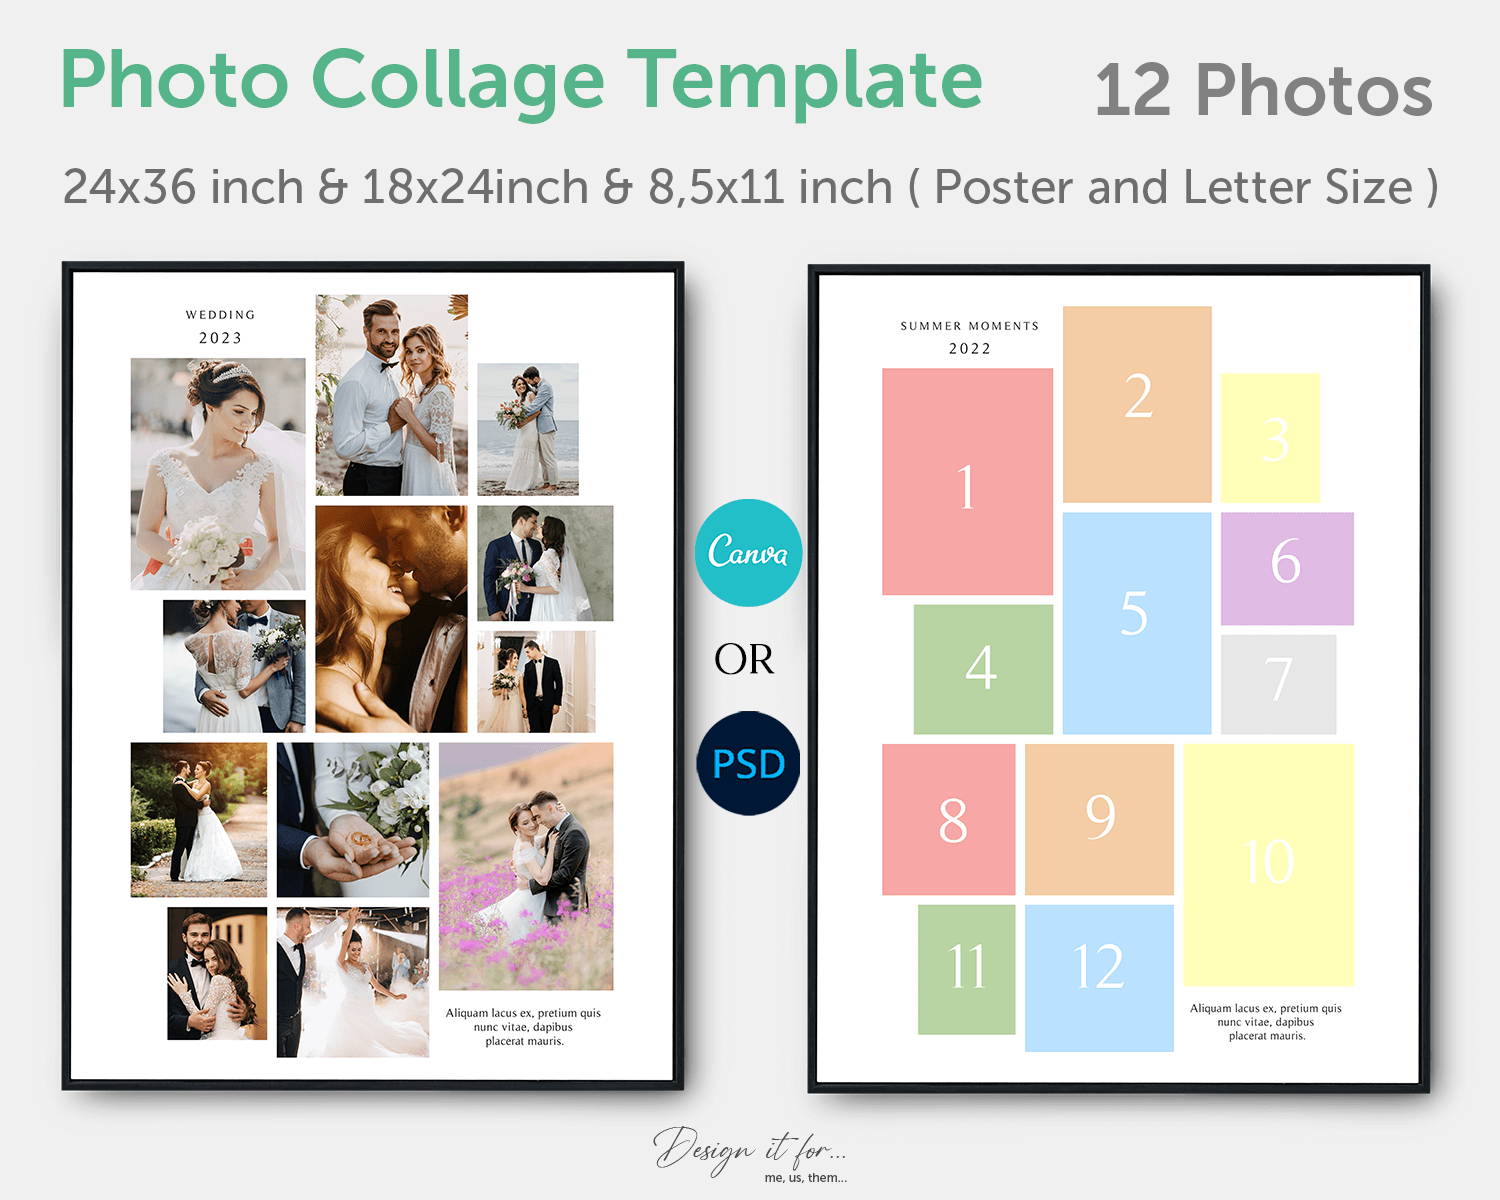 12 Photo Collage Template